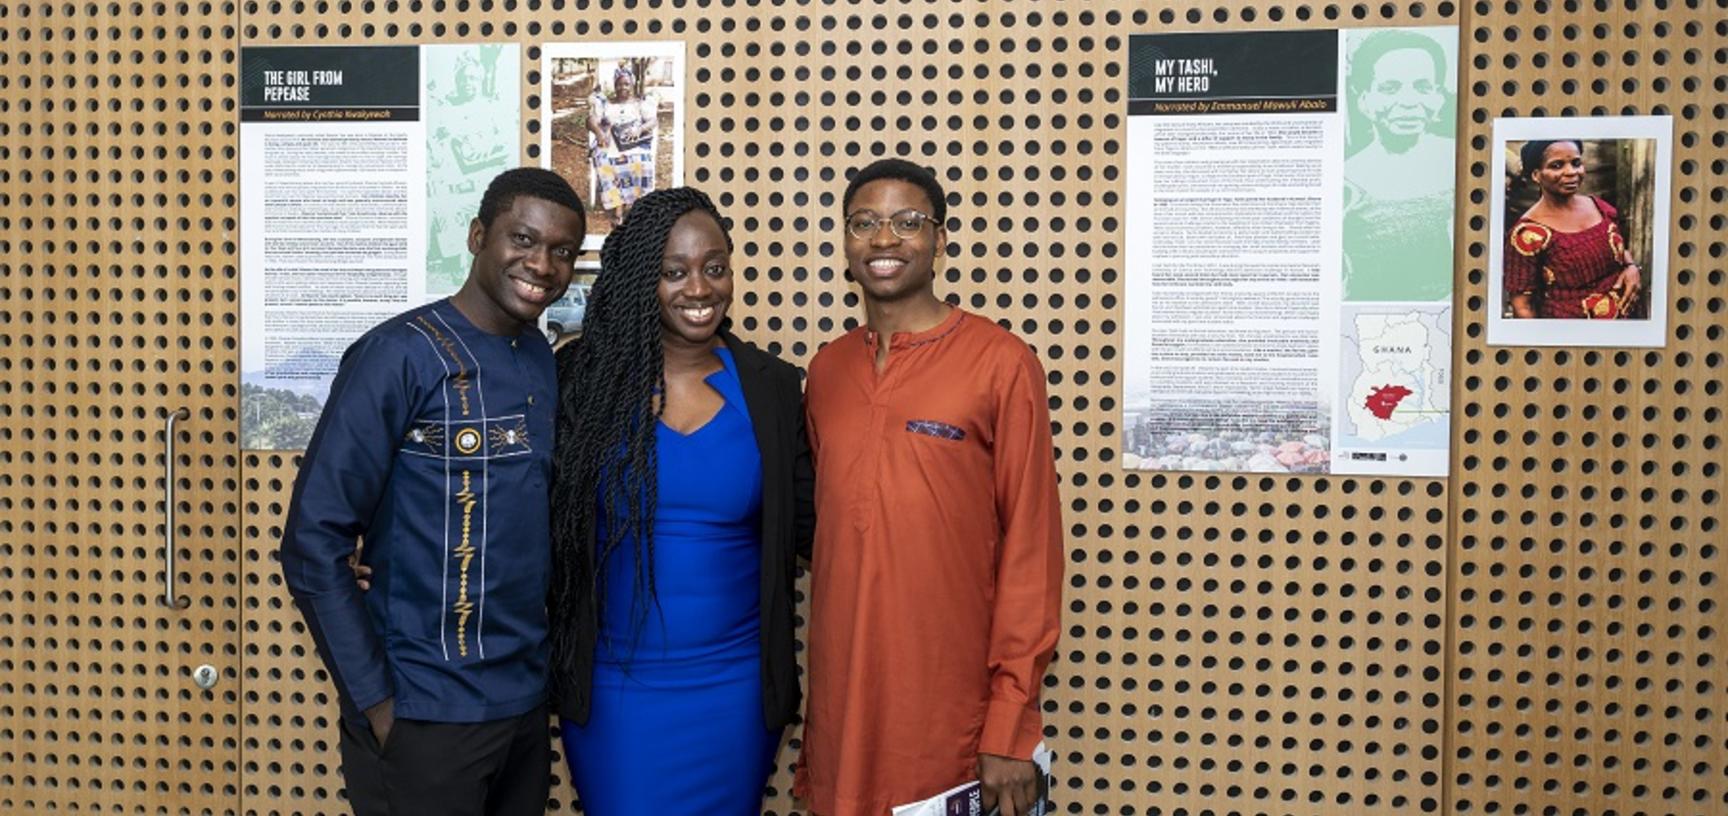 3 people smile at the camera in front of their poster exhibit